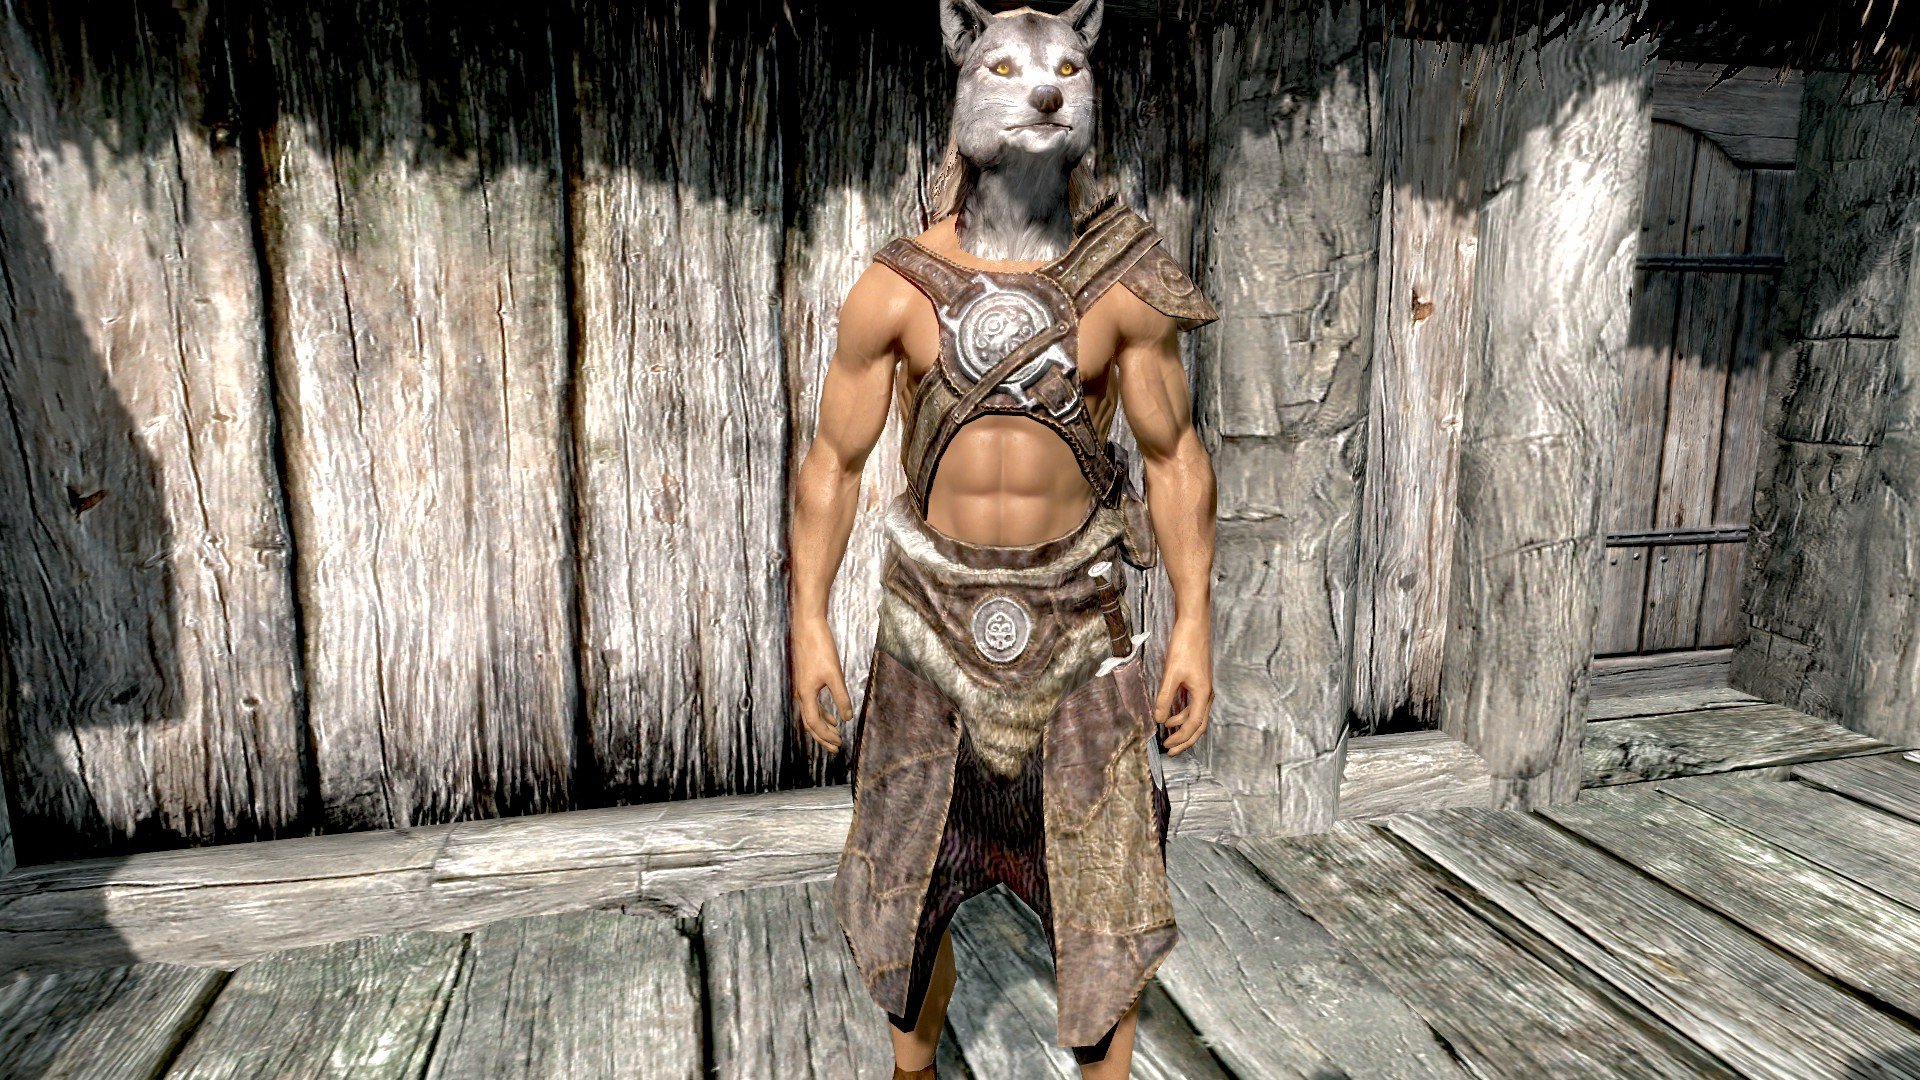 Yiffy Age Of Skyrim Page 179 Downloads Skyrim Adult And Sex Mods